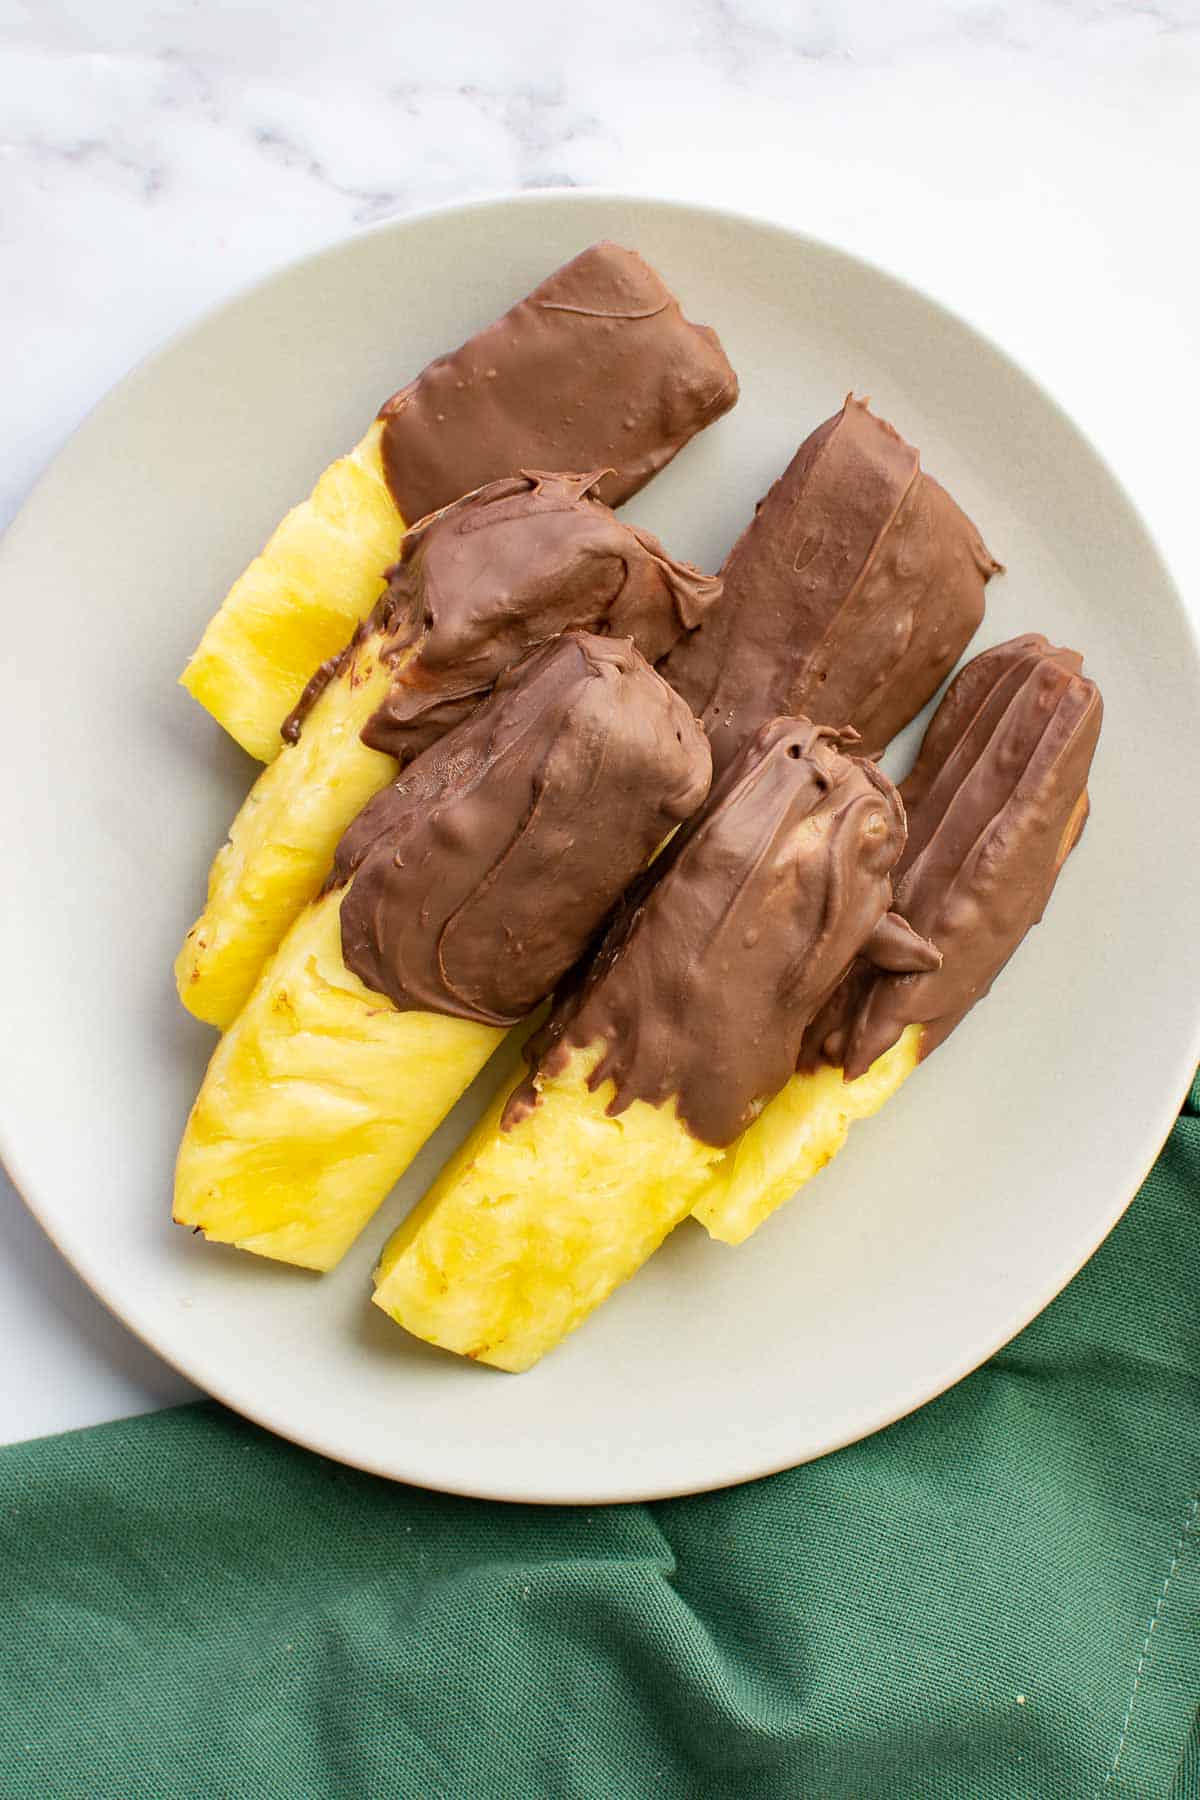 Pineapple slicks with melted chocolate on a plate.